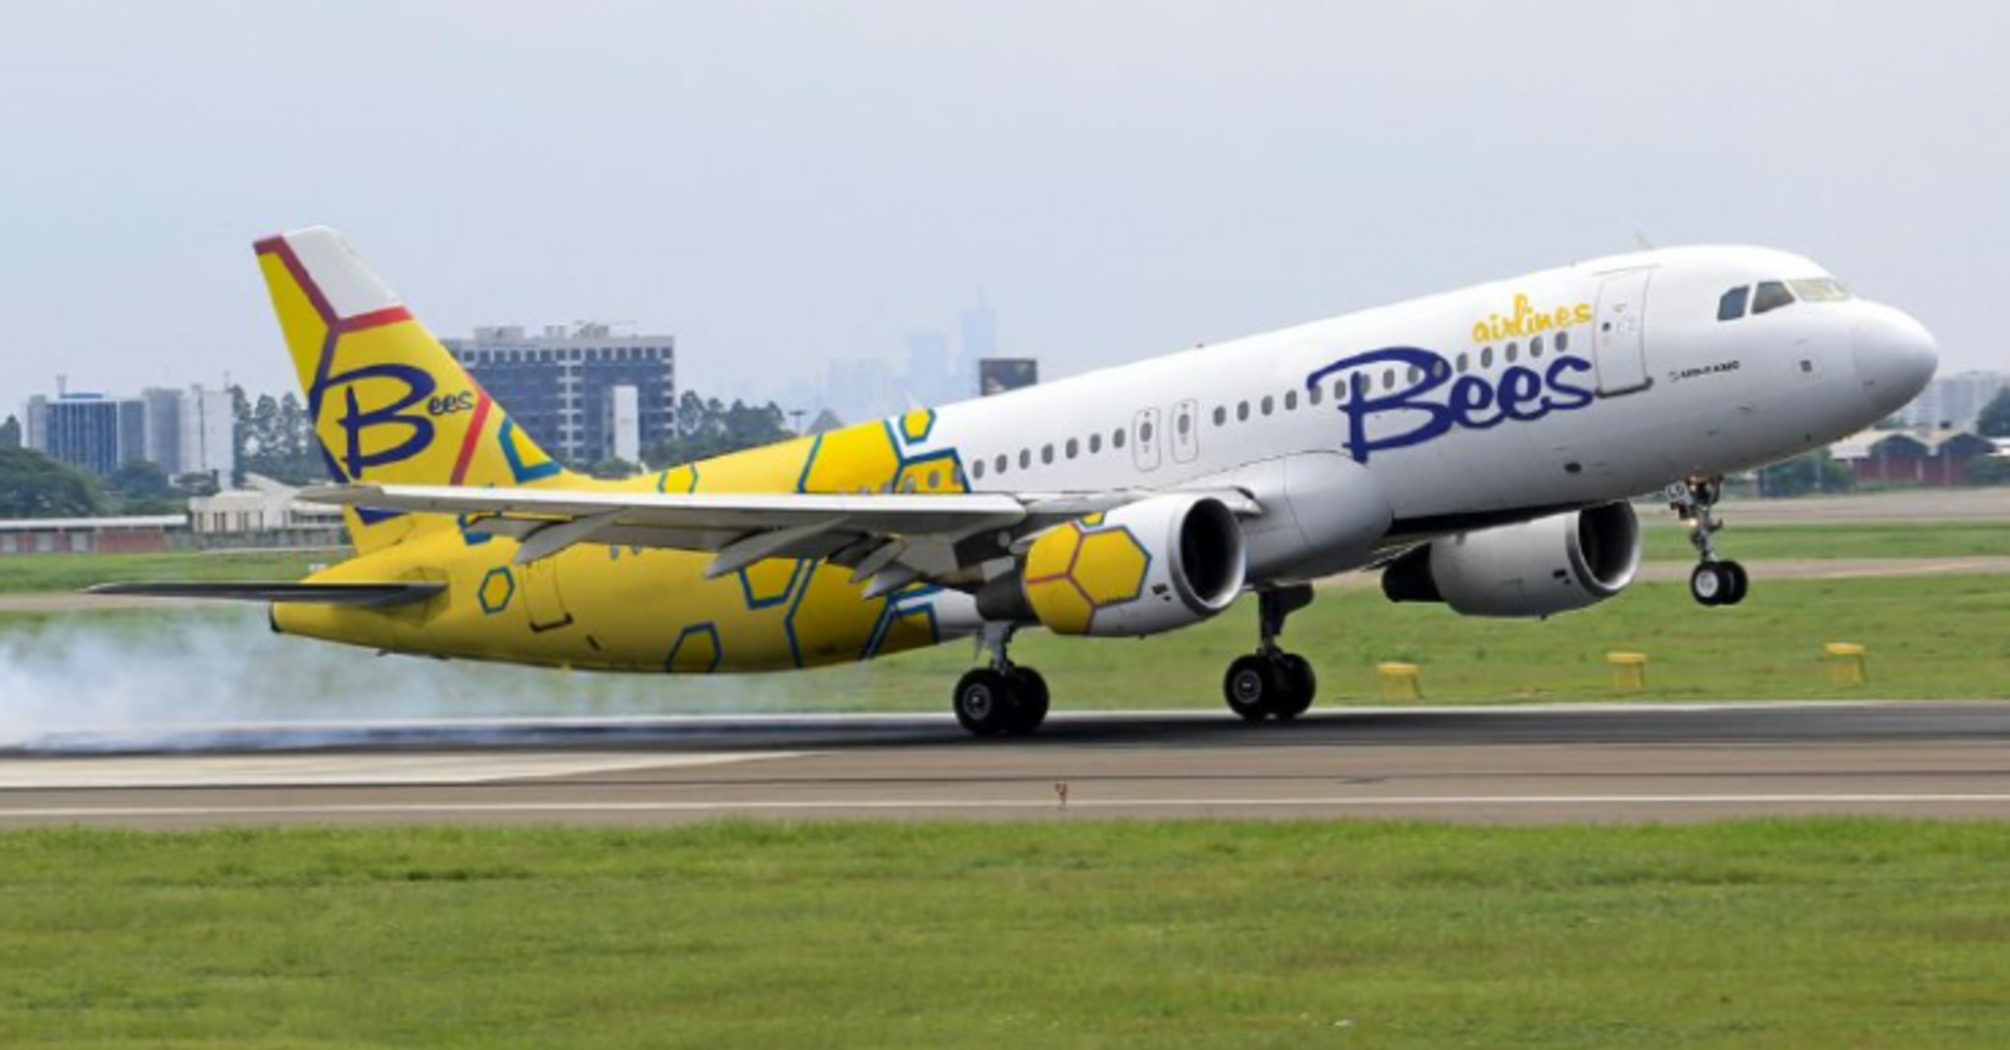 A new competitor among air carriers: Bees Airlines operates its first flights in Romania